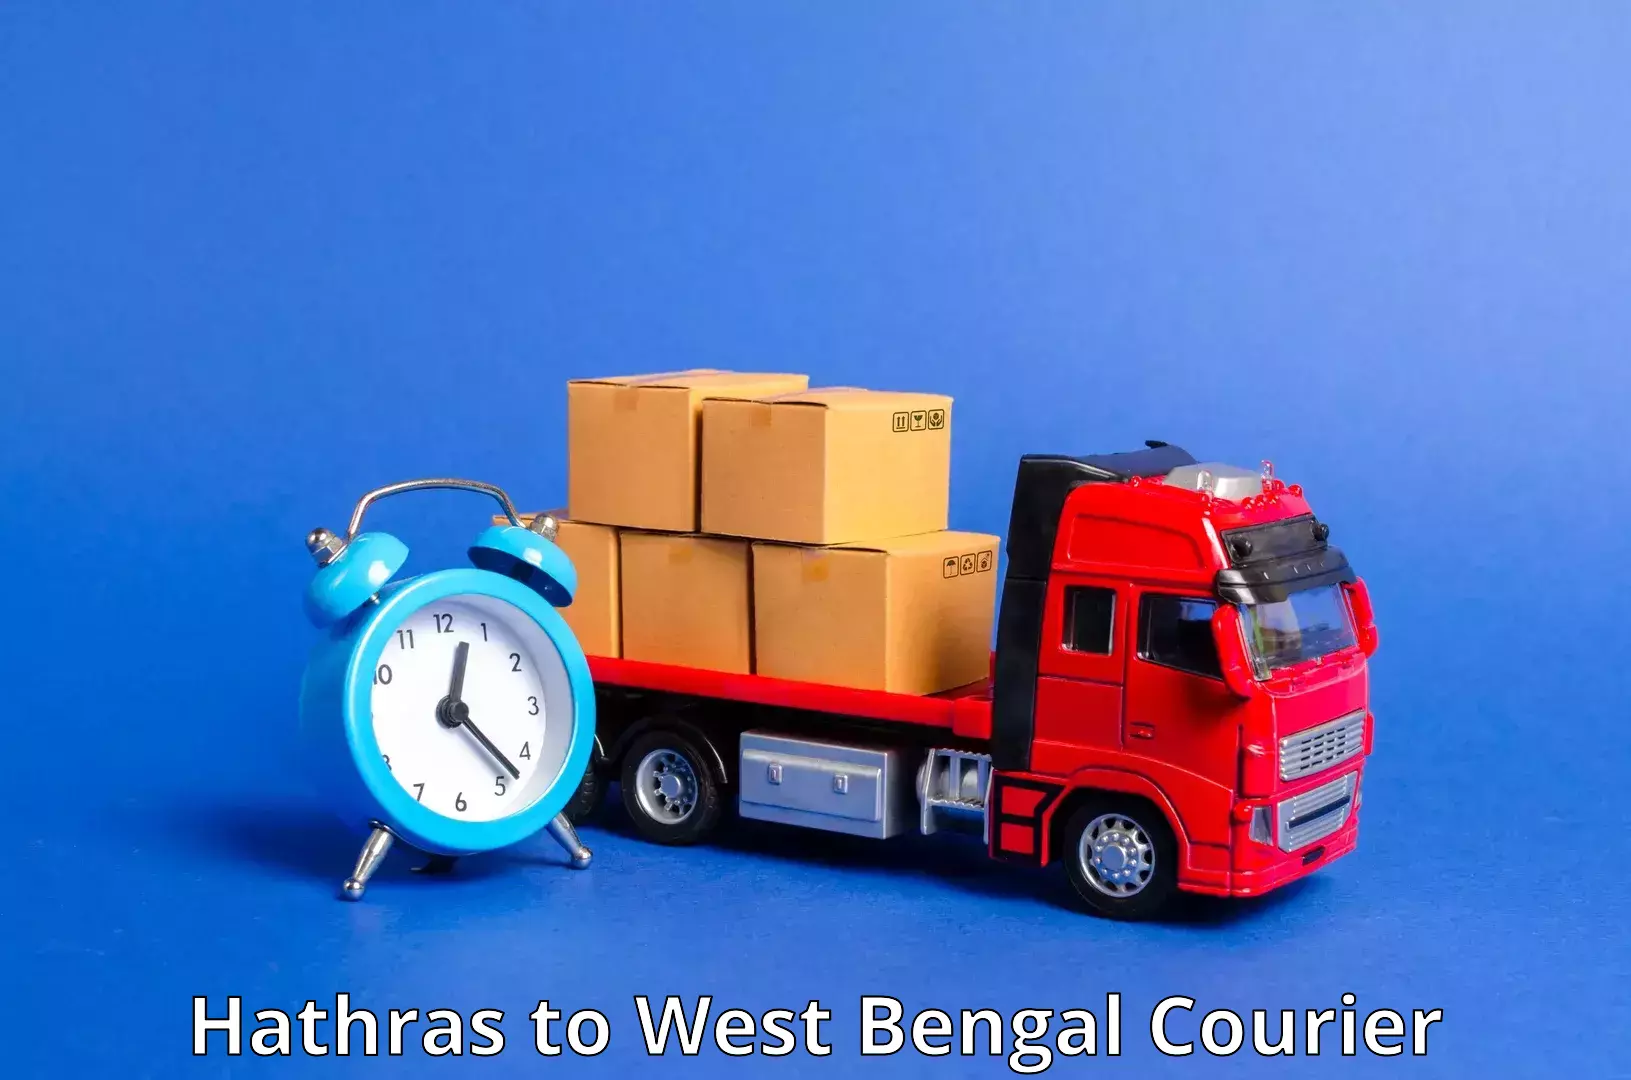 Courier app Hathras to West Bengal